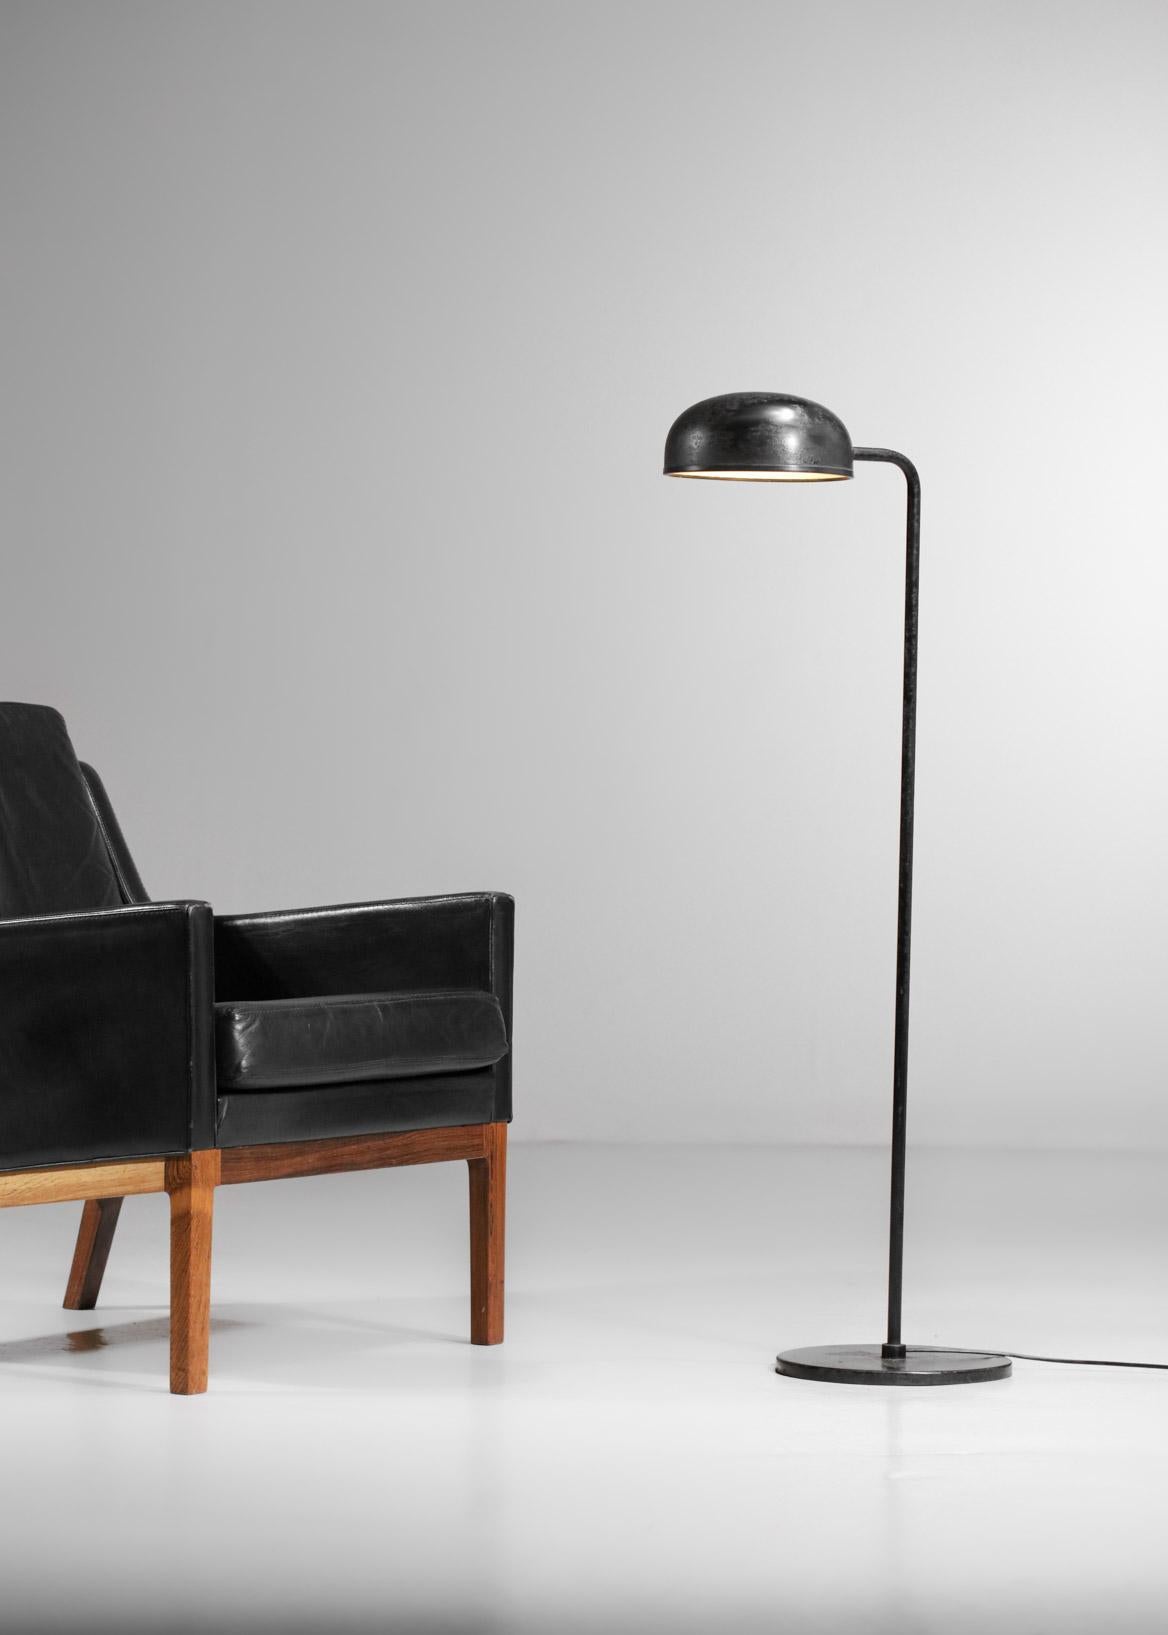 Lacquered Scandinavian Metal Floor Lamp from the 70's about Randers, E205